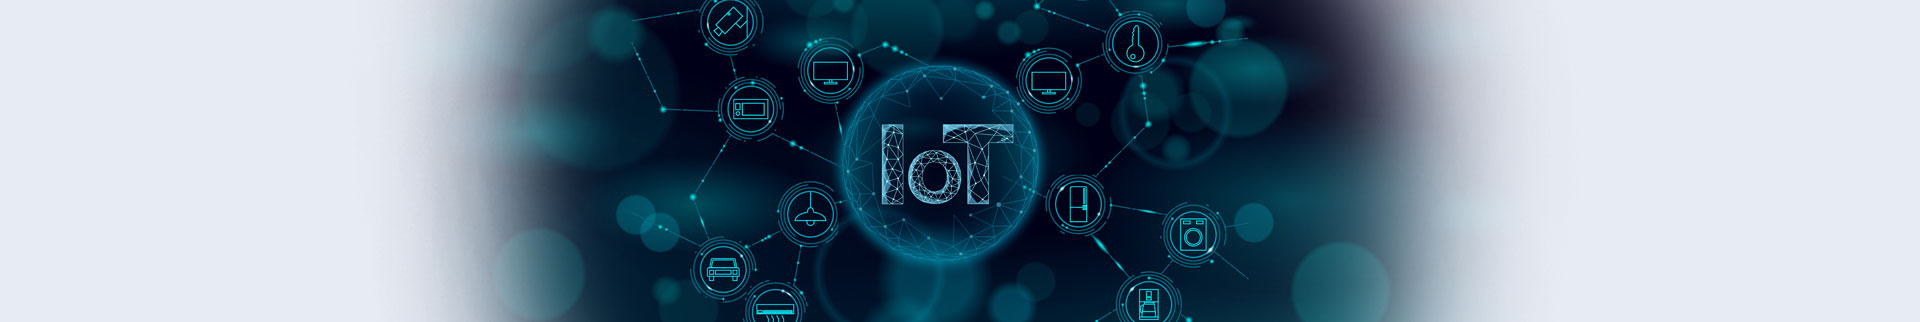 SD-WAN and IoT